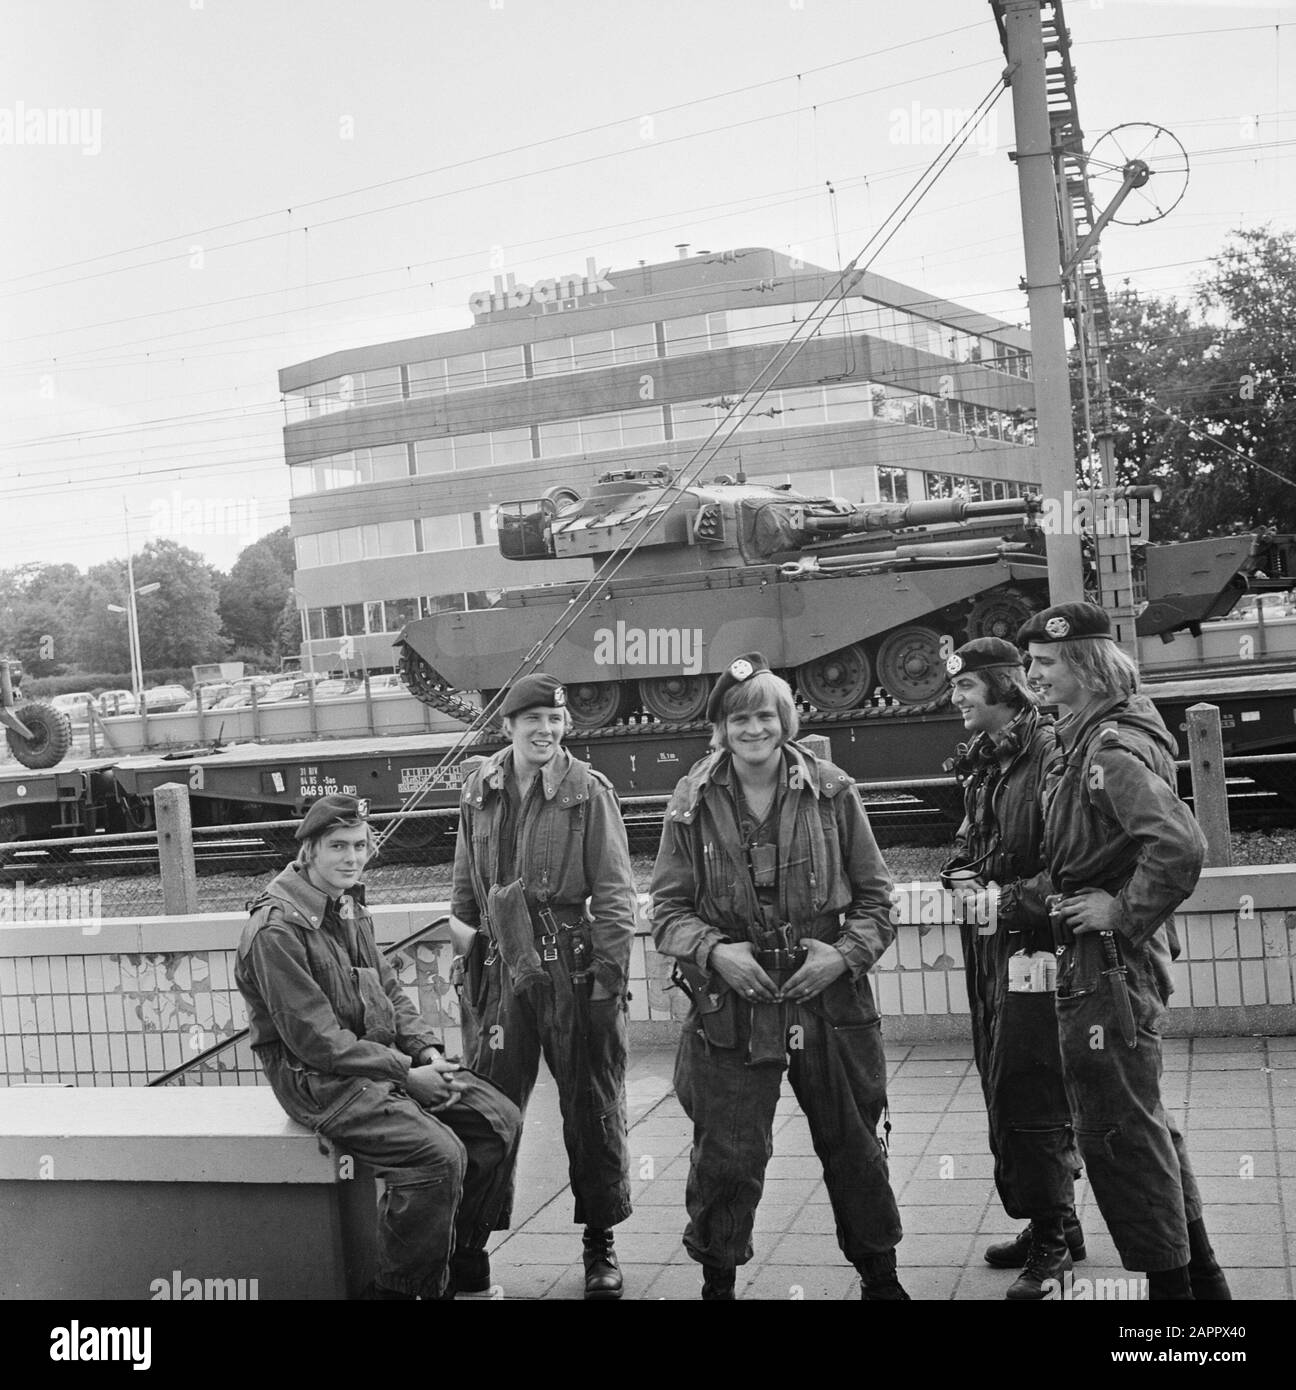 Escadrons tanks depart from station Amersfoort for big exercise Big Ferro in West Germany Date: September 10, 1973 Location: Amersfoort Keywords: TANKS, exercises, stations Personal name: Big Ferro Stock Photo